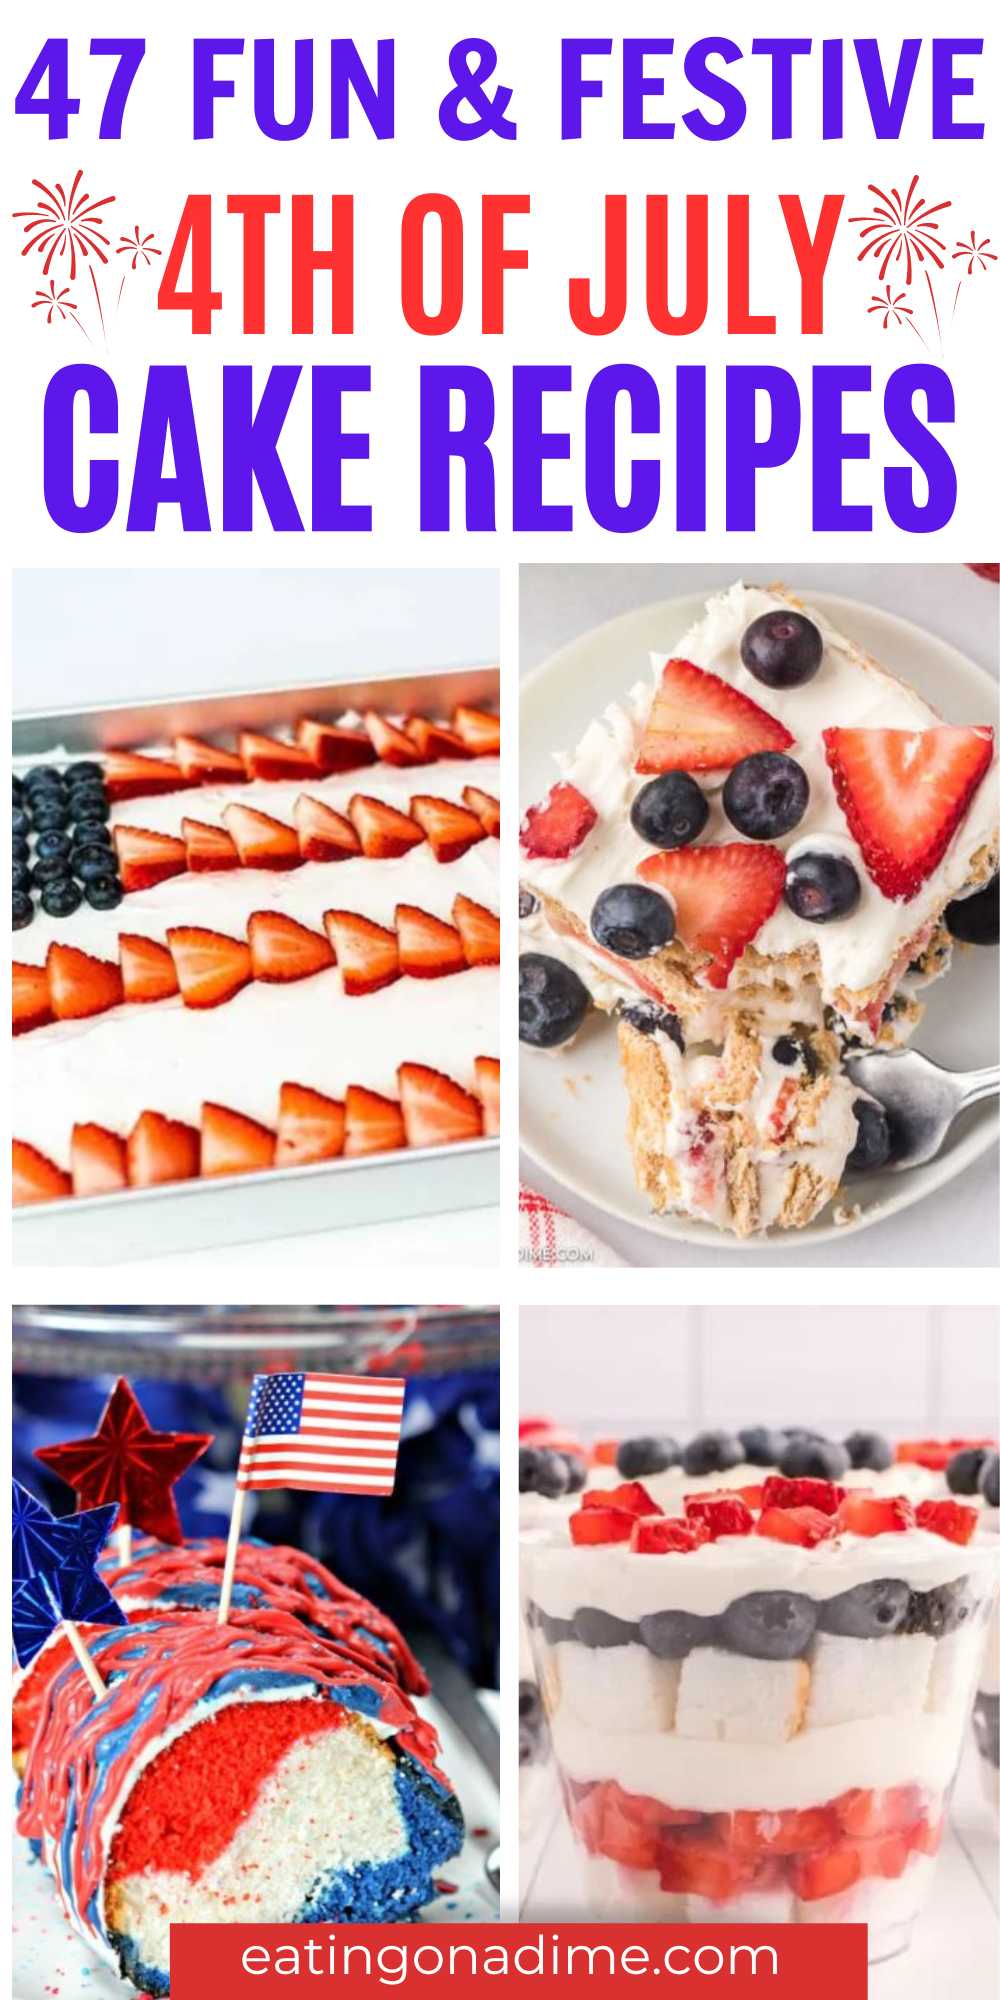 If there’s one thing that rivals fireworks every 4th of July, it’s the 4th of July cake. Make these easy and delicious cakes for your party! We’ve rounded up some of the best 4th of July cake recipes that will satisfy everyone's sweet craving. #eatingonadime #4thofjulycakes #cakerecipesforjuly4th #4thofjulydesserts